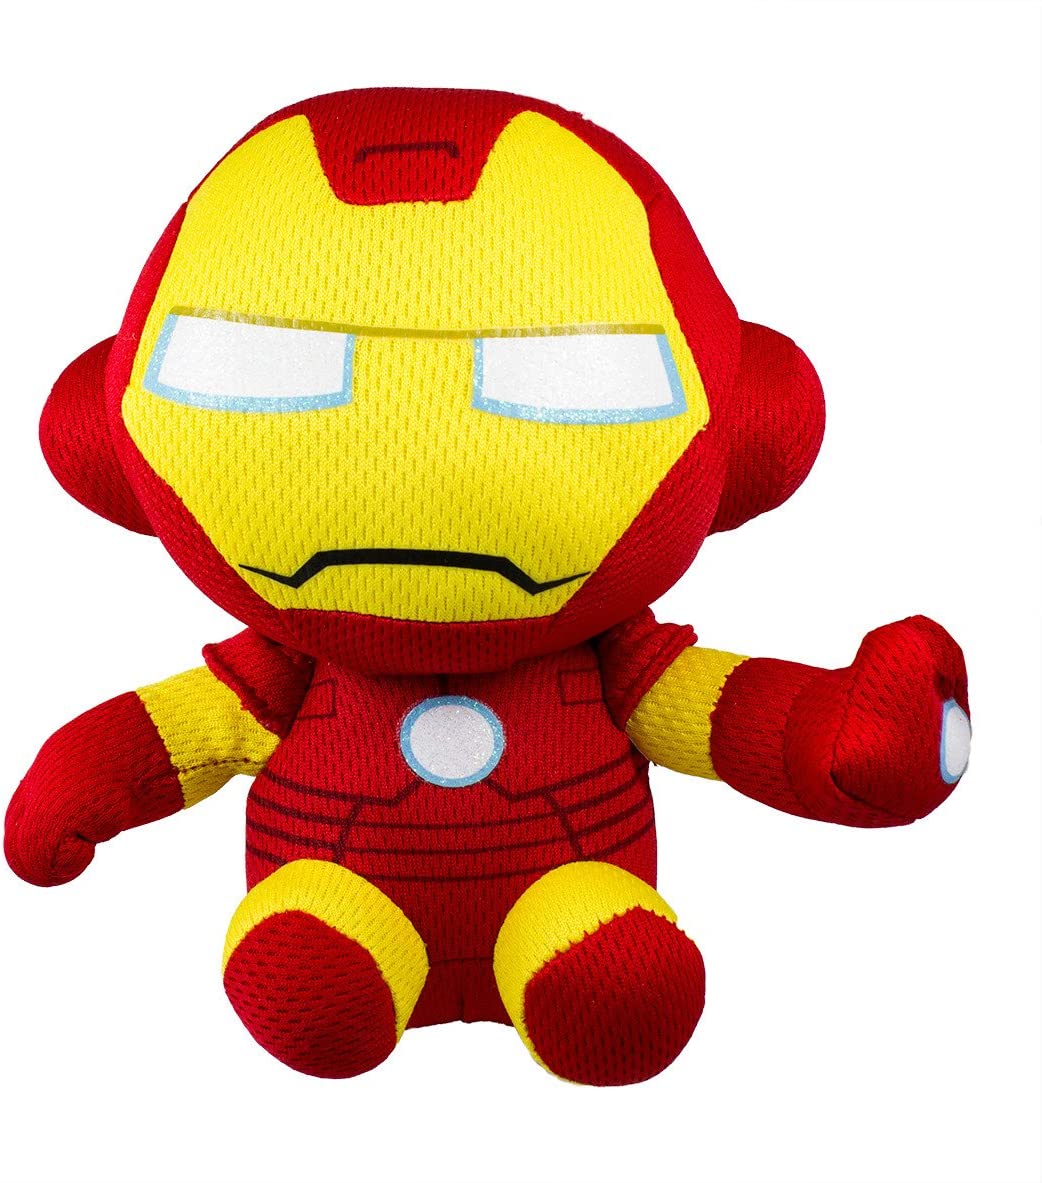 Ty Iron Man Plush Toy - Beanie Baby Stuffed Animal by Marvel Red/Yellow (Reg Size - 6 inches)